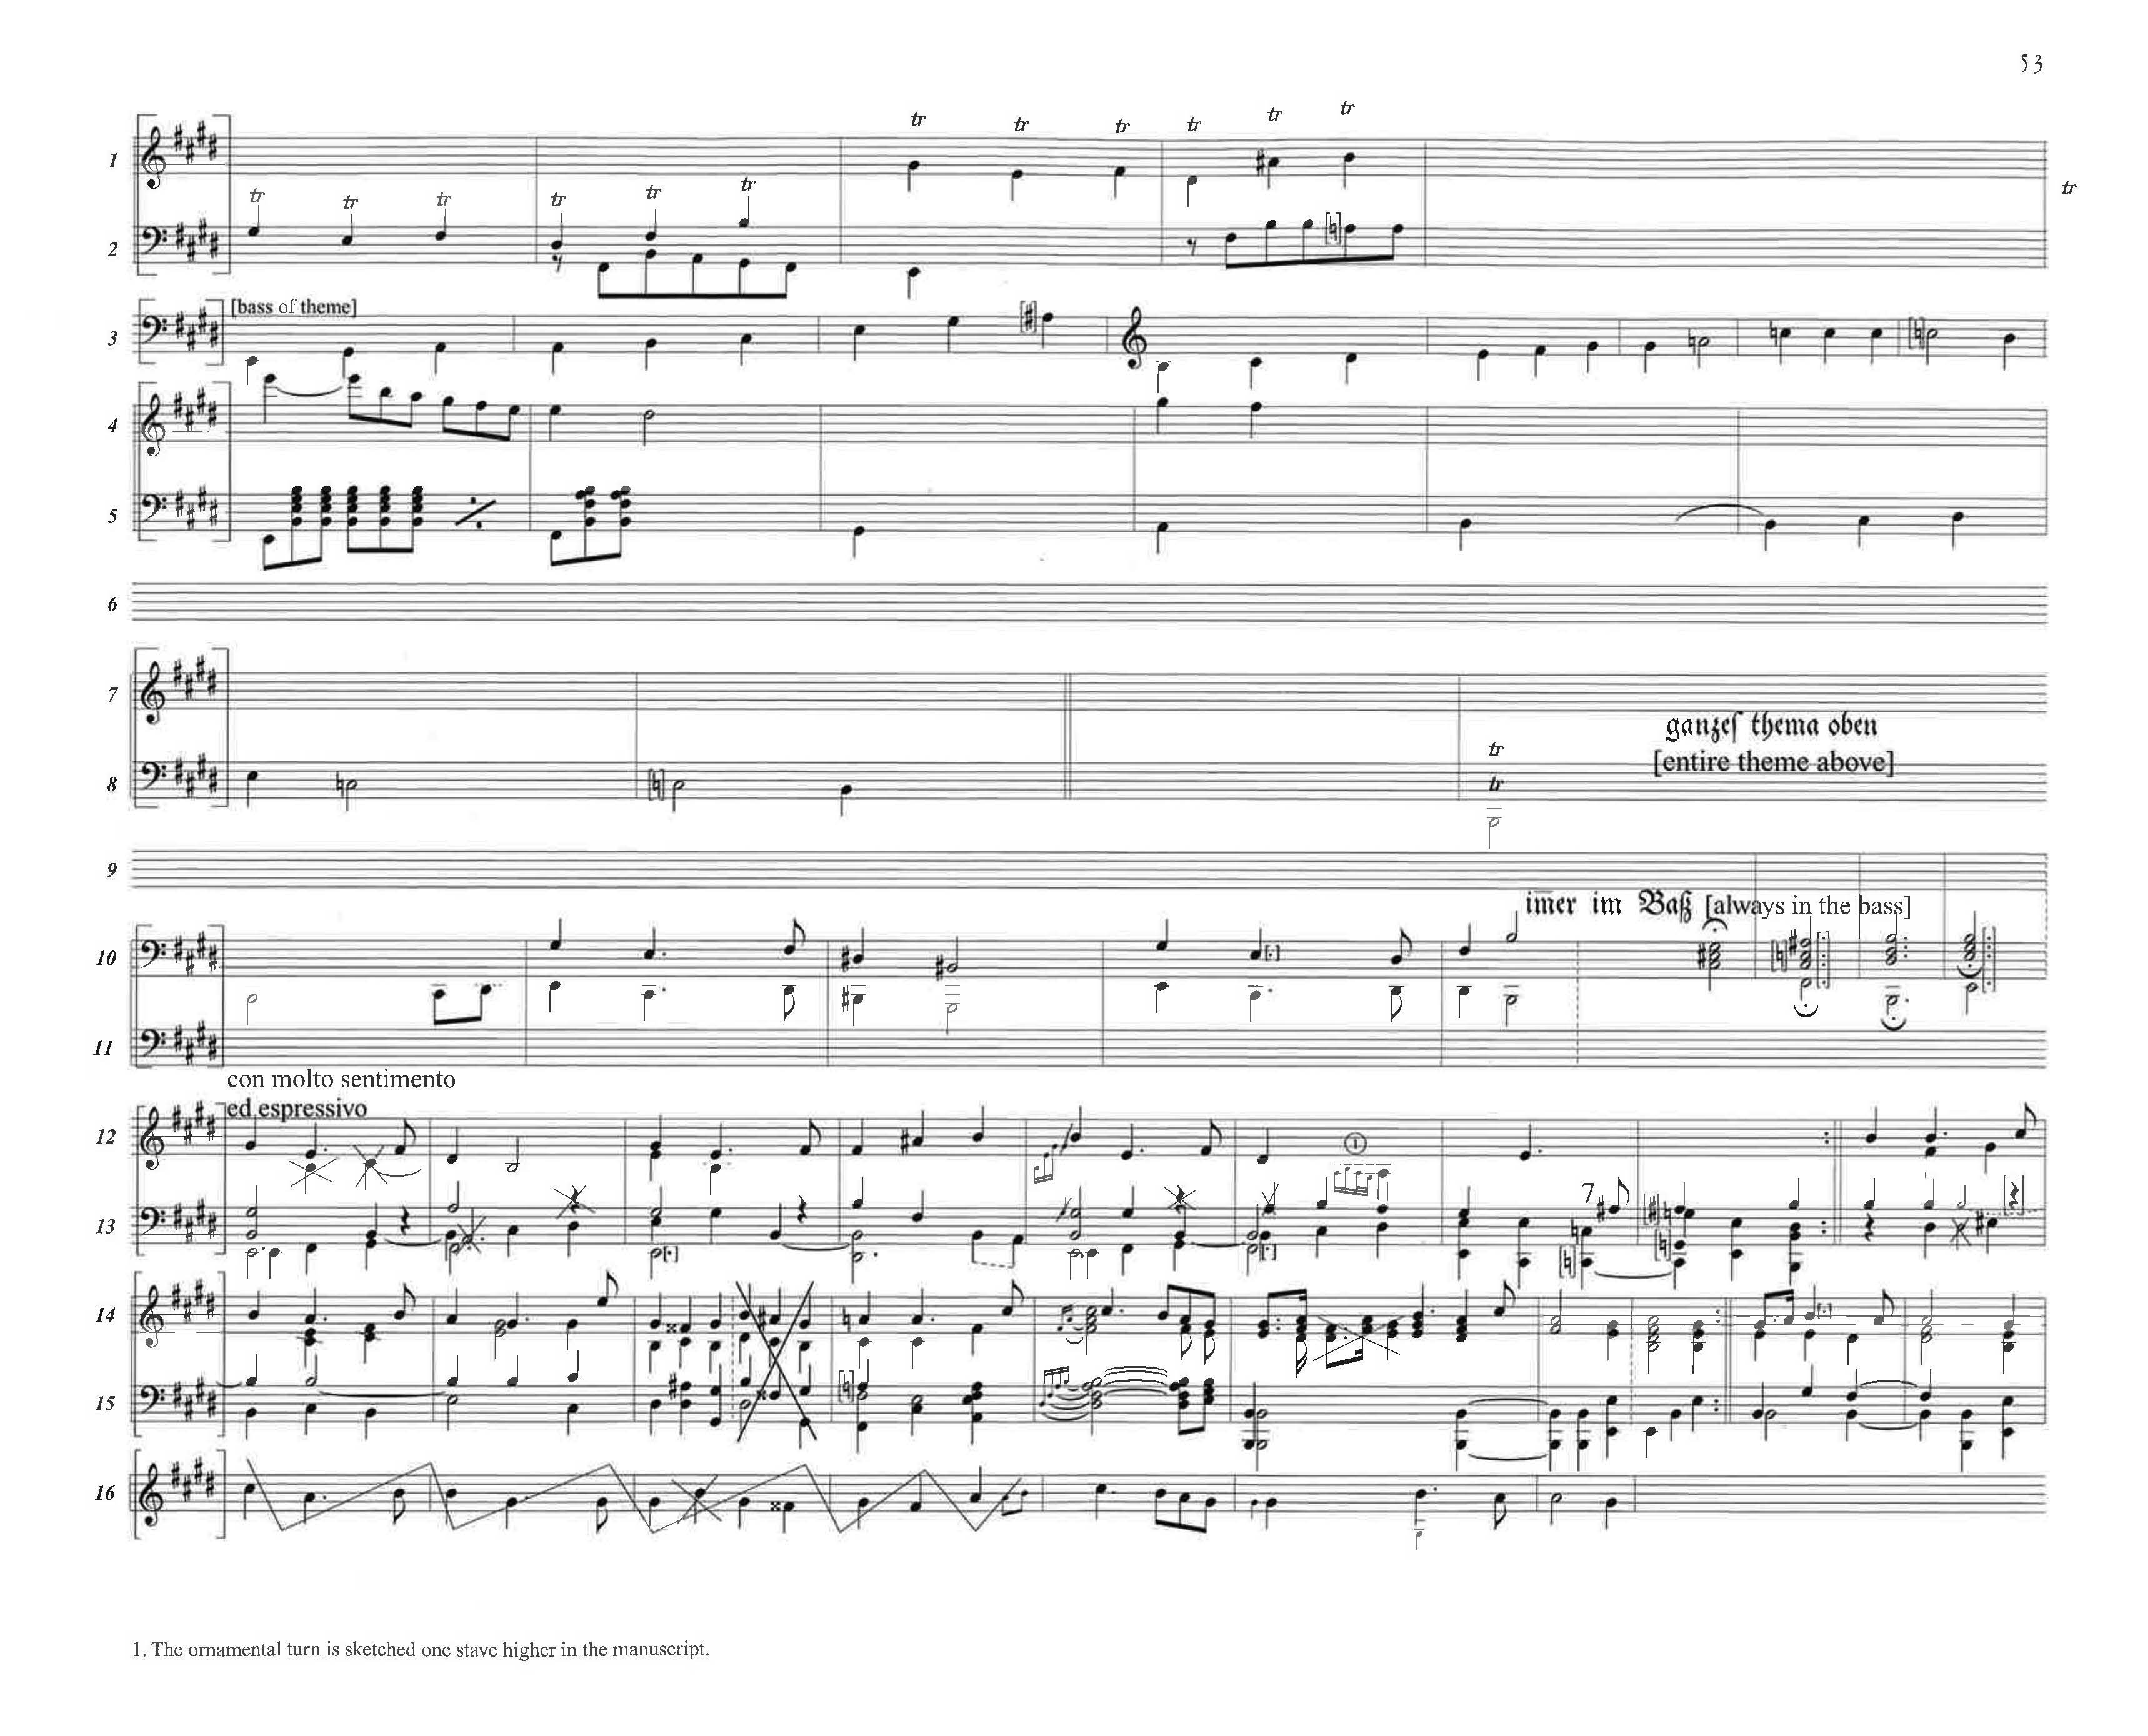 A white page of music score.